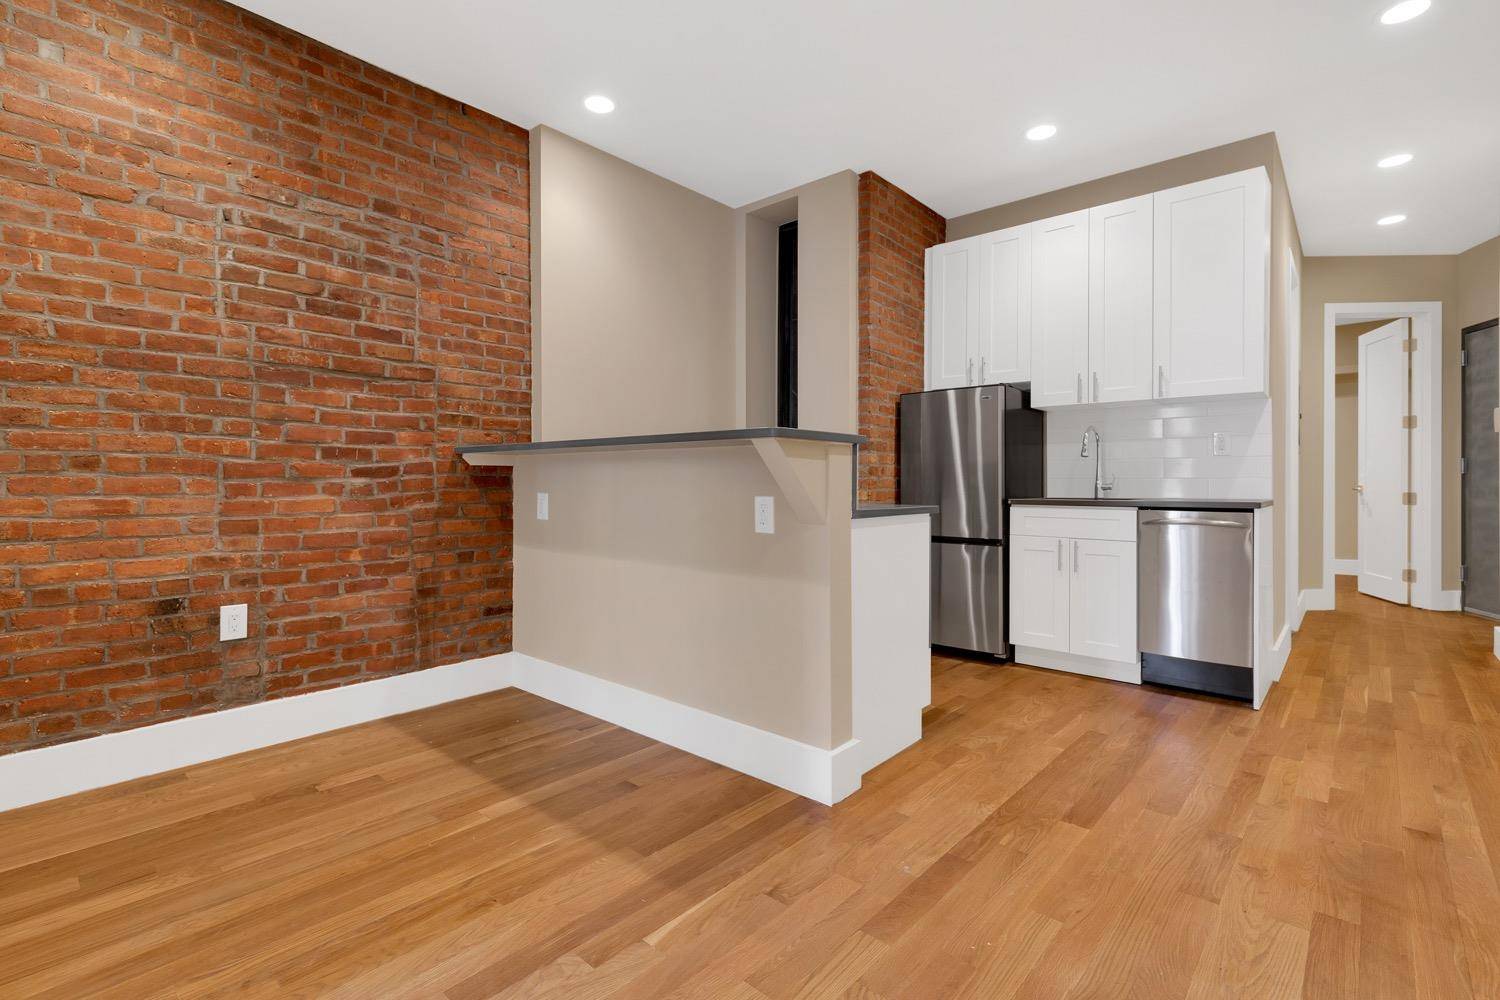 STUNNING HOME W CONDO QUALITY FINISHESABOUT APT 1B LG Washer Dryer Combo, Wall Mounted Fujitsu Air Conditioning amp ; Heating Units w Remote Control, Exposed Brick Throughout, Recessed Lighting Throughout, ...